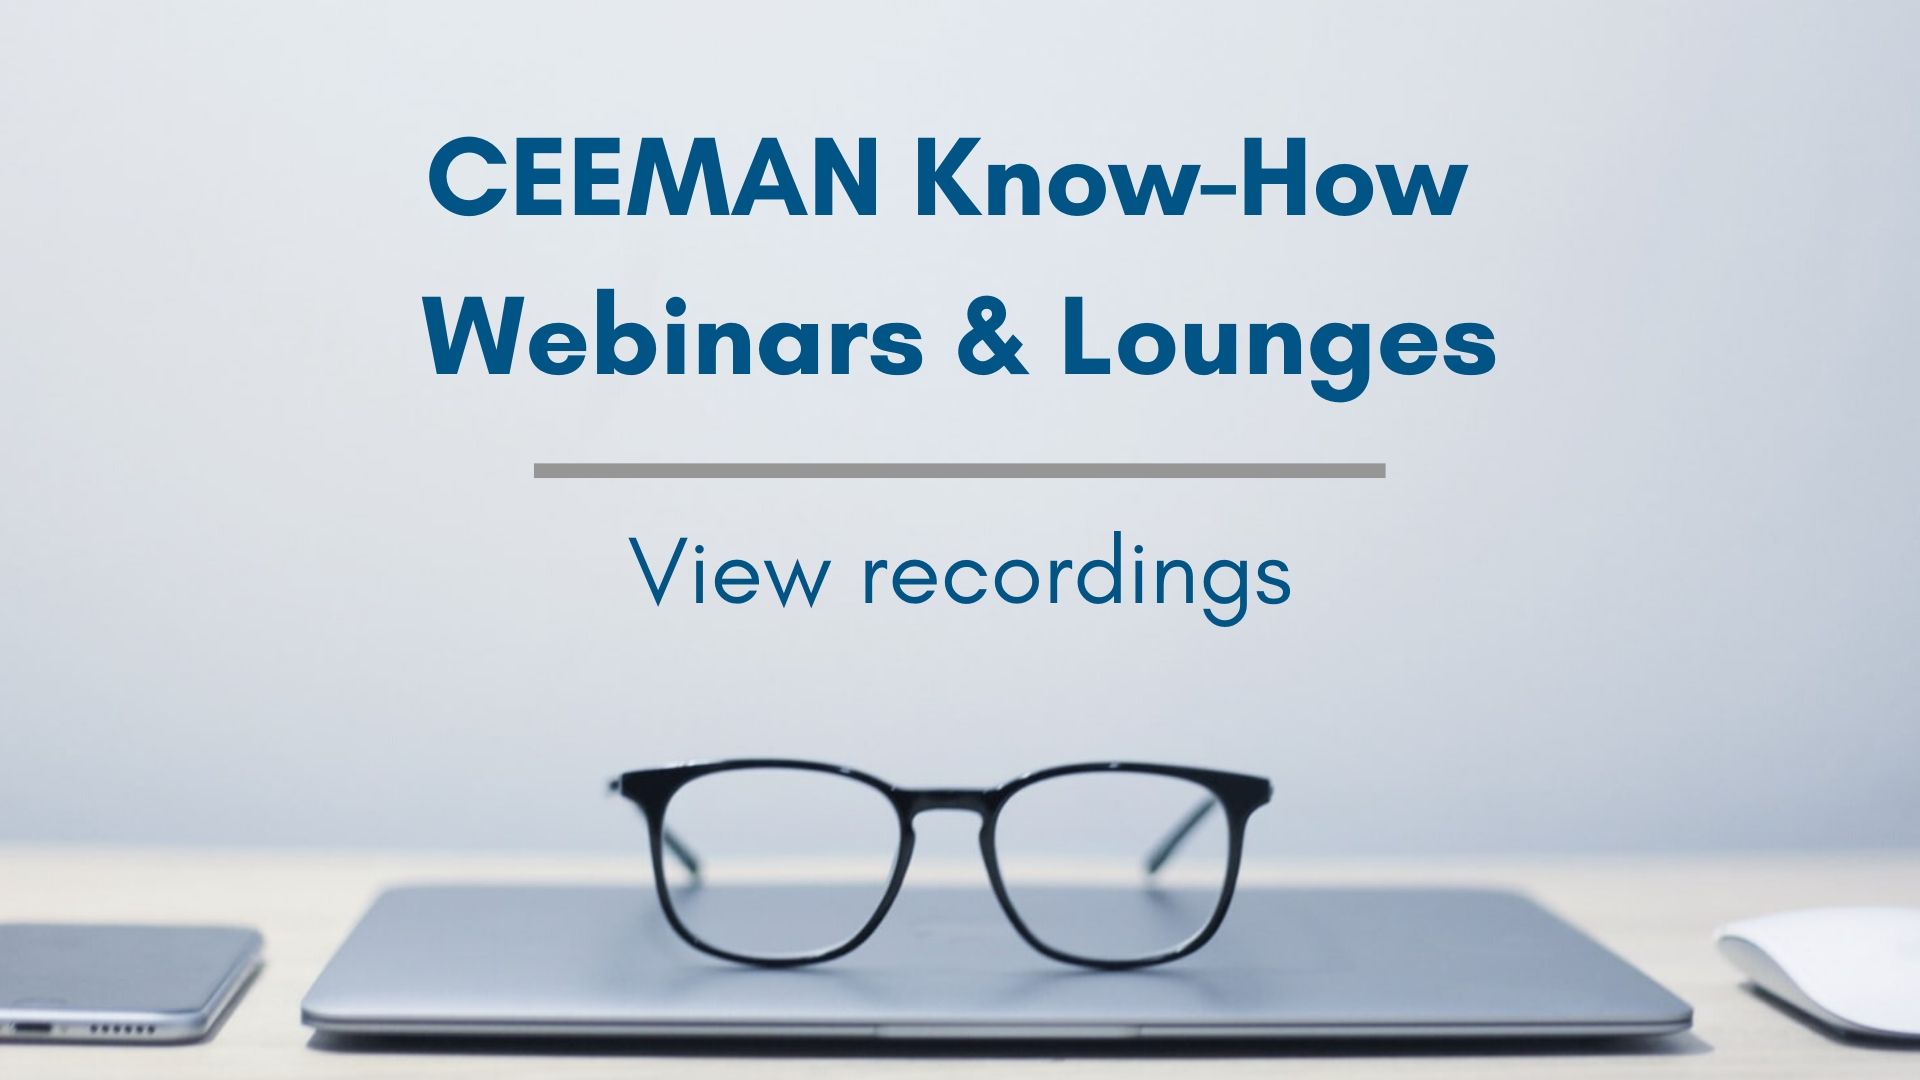 View recordings of the latest CEEMAN online events